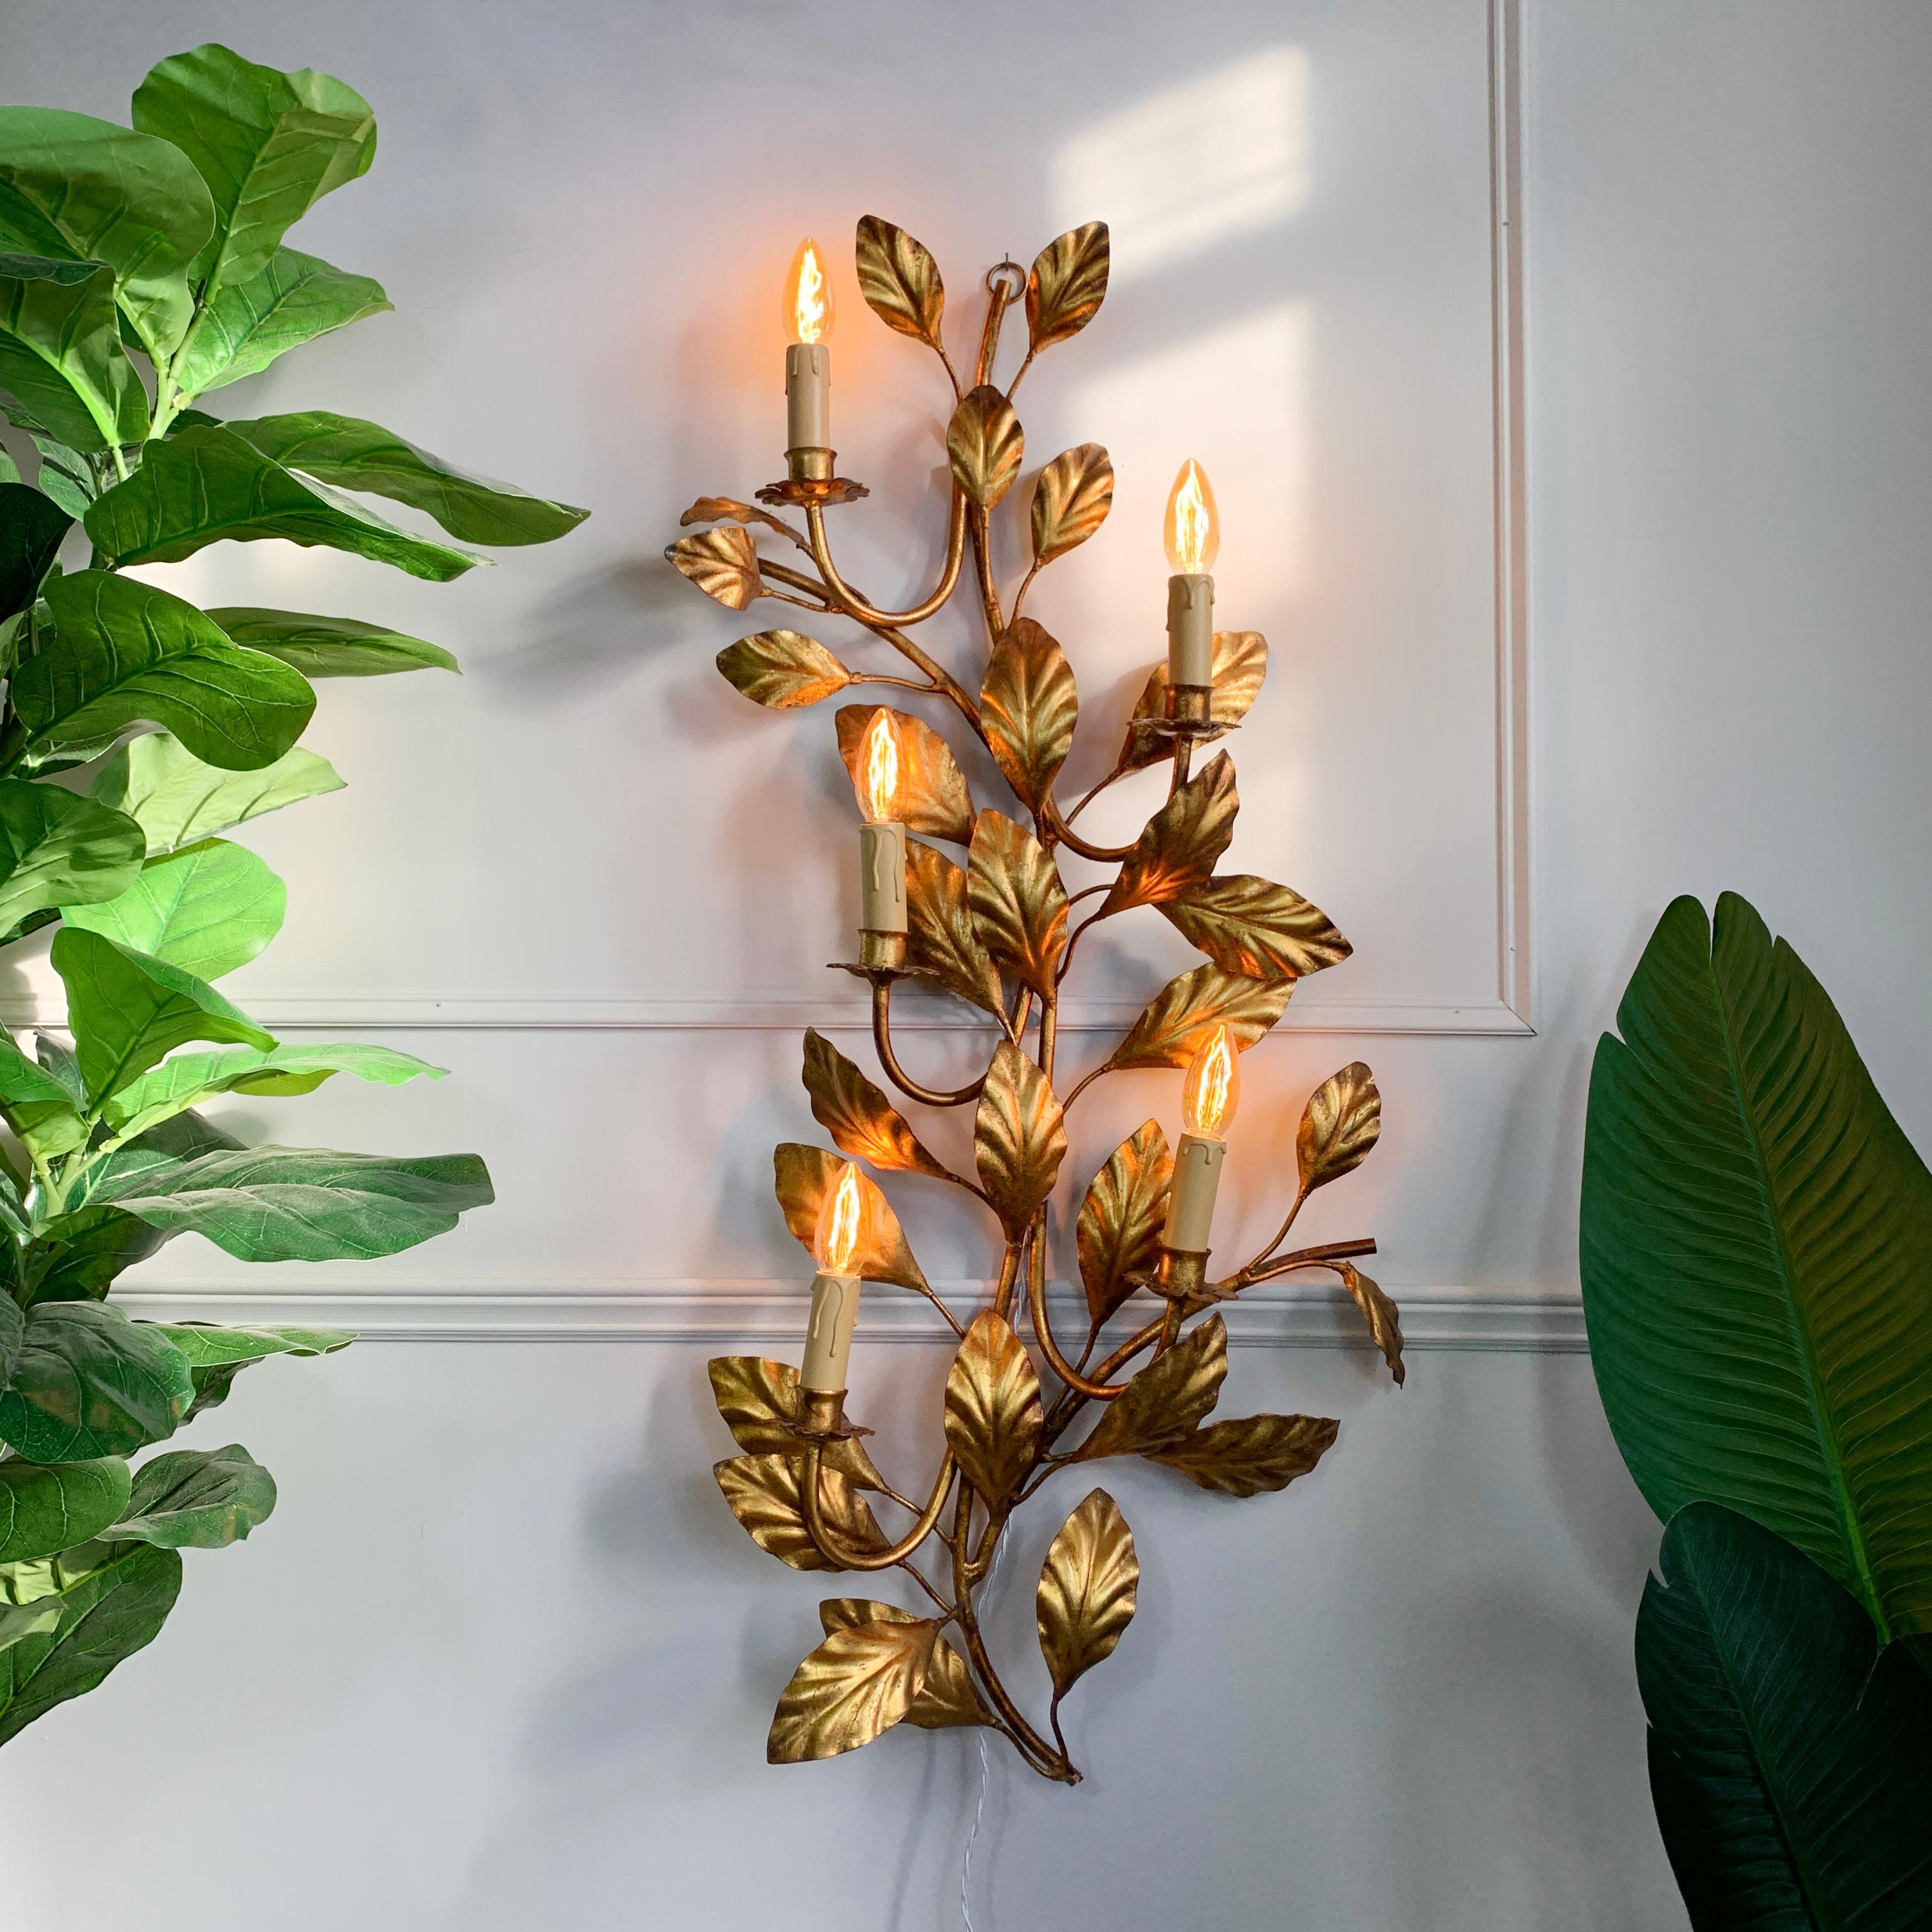 An incredible wall light by the German designer Hans Kogl, the branch and leaf design are entirely gilded, and the light is of very large proportions, with 5 e14 (small screw in) lamp holders. Such a beautiful piece, the design gives the light a